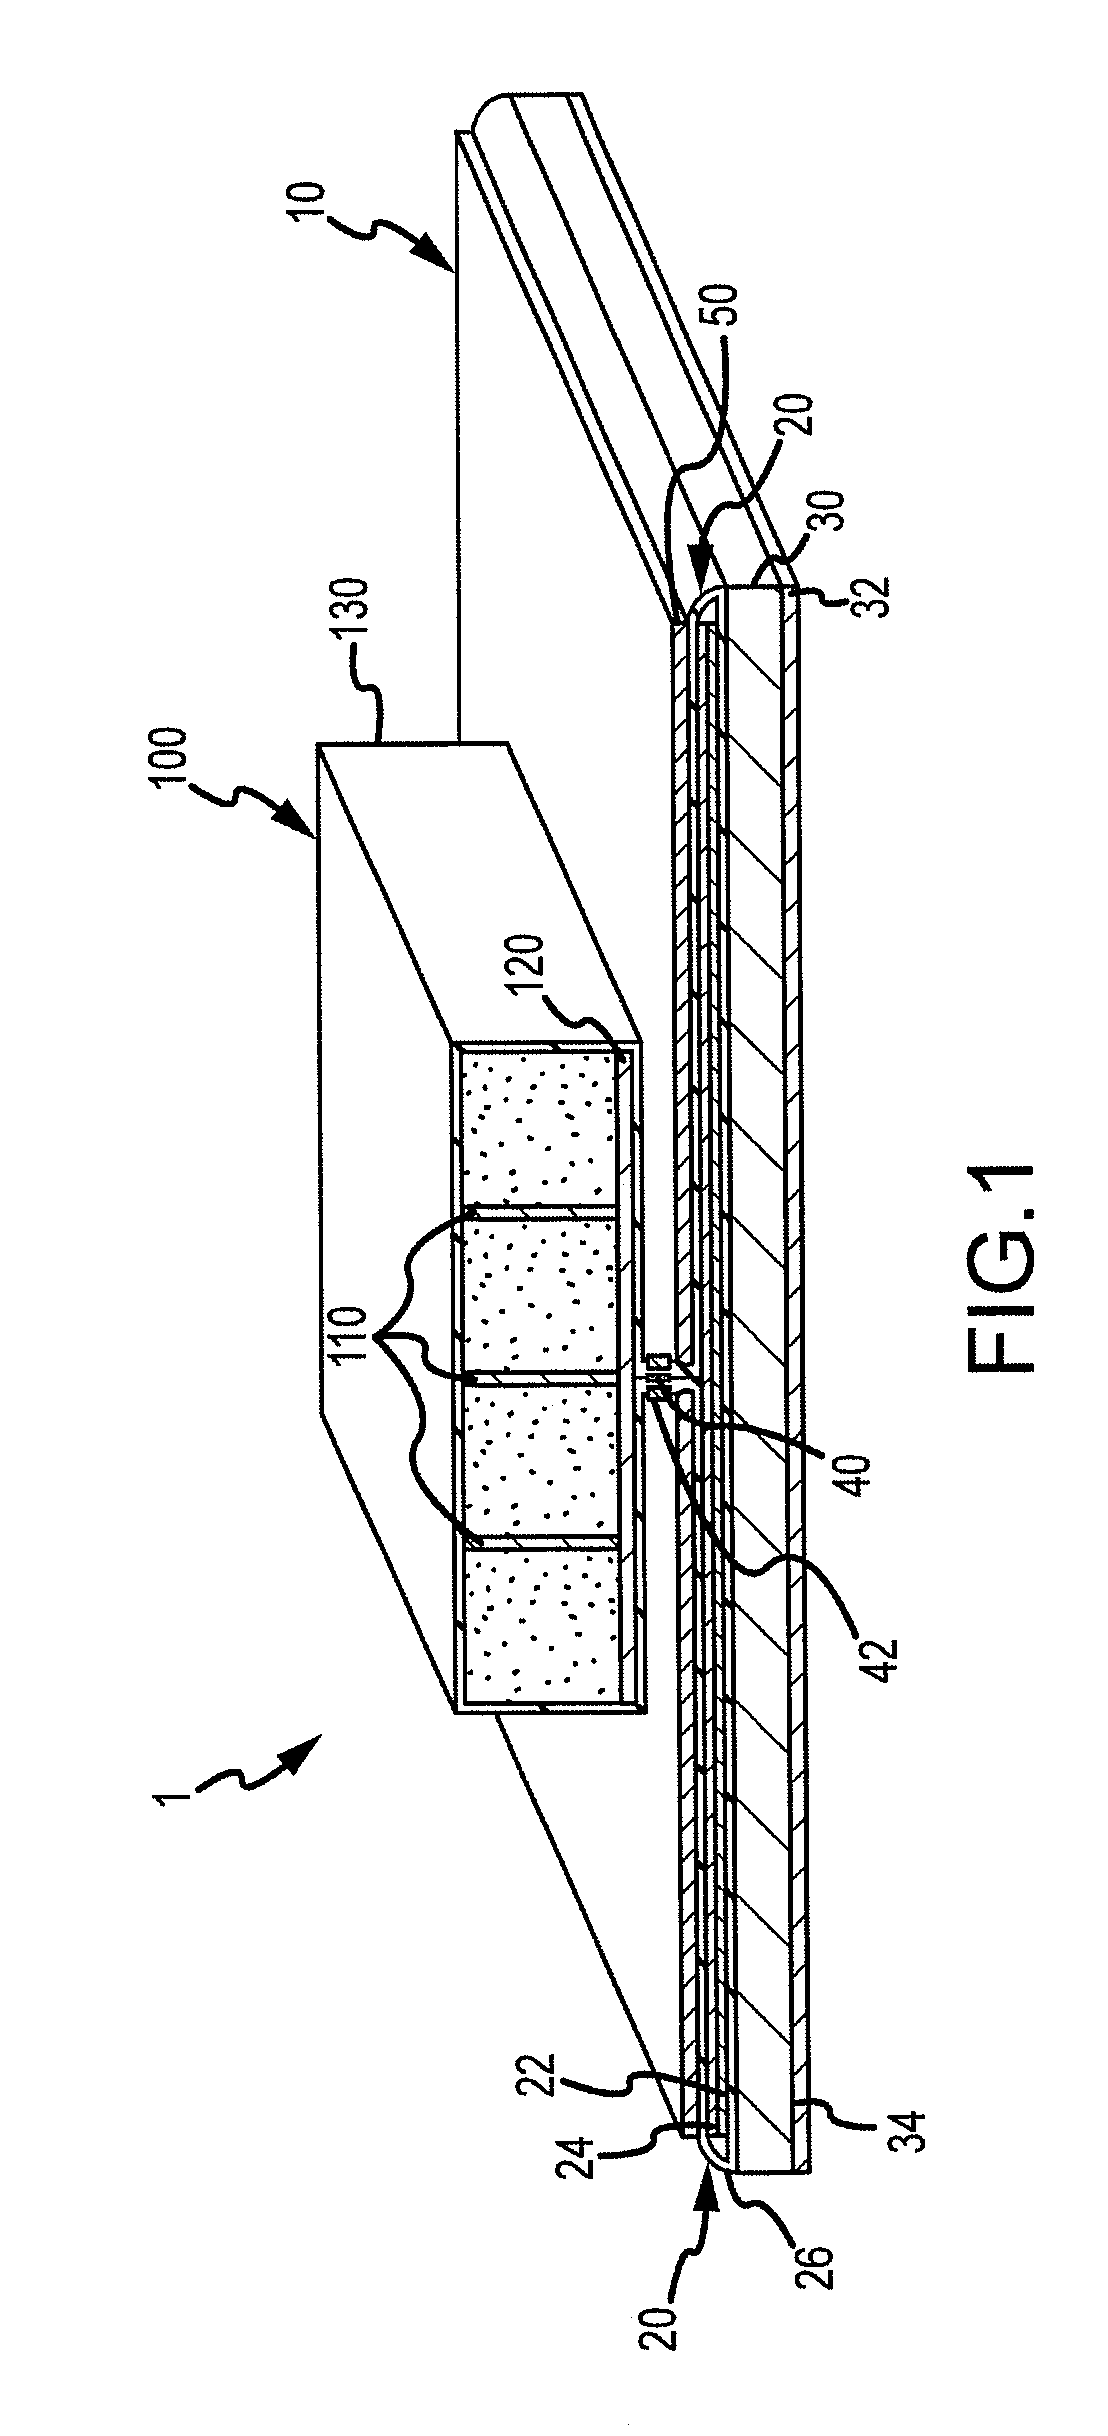 Sorption-based adhesive contact cooling apparatus and method